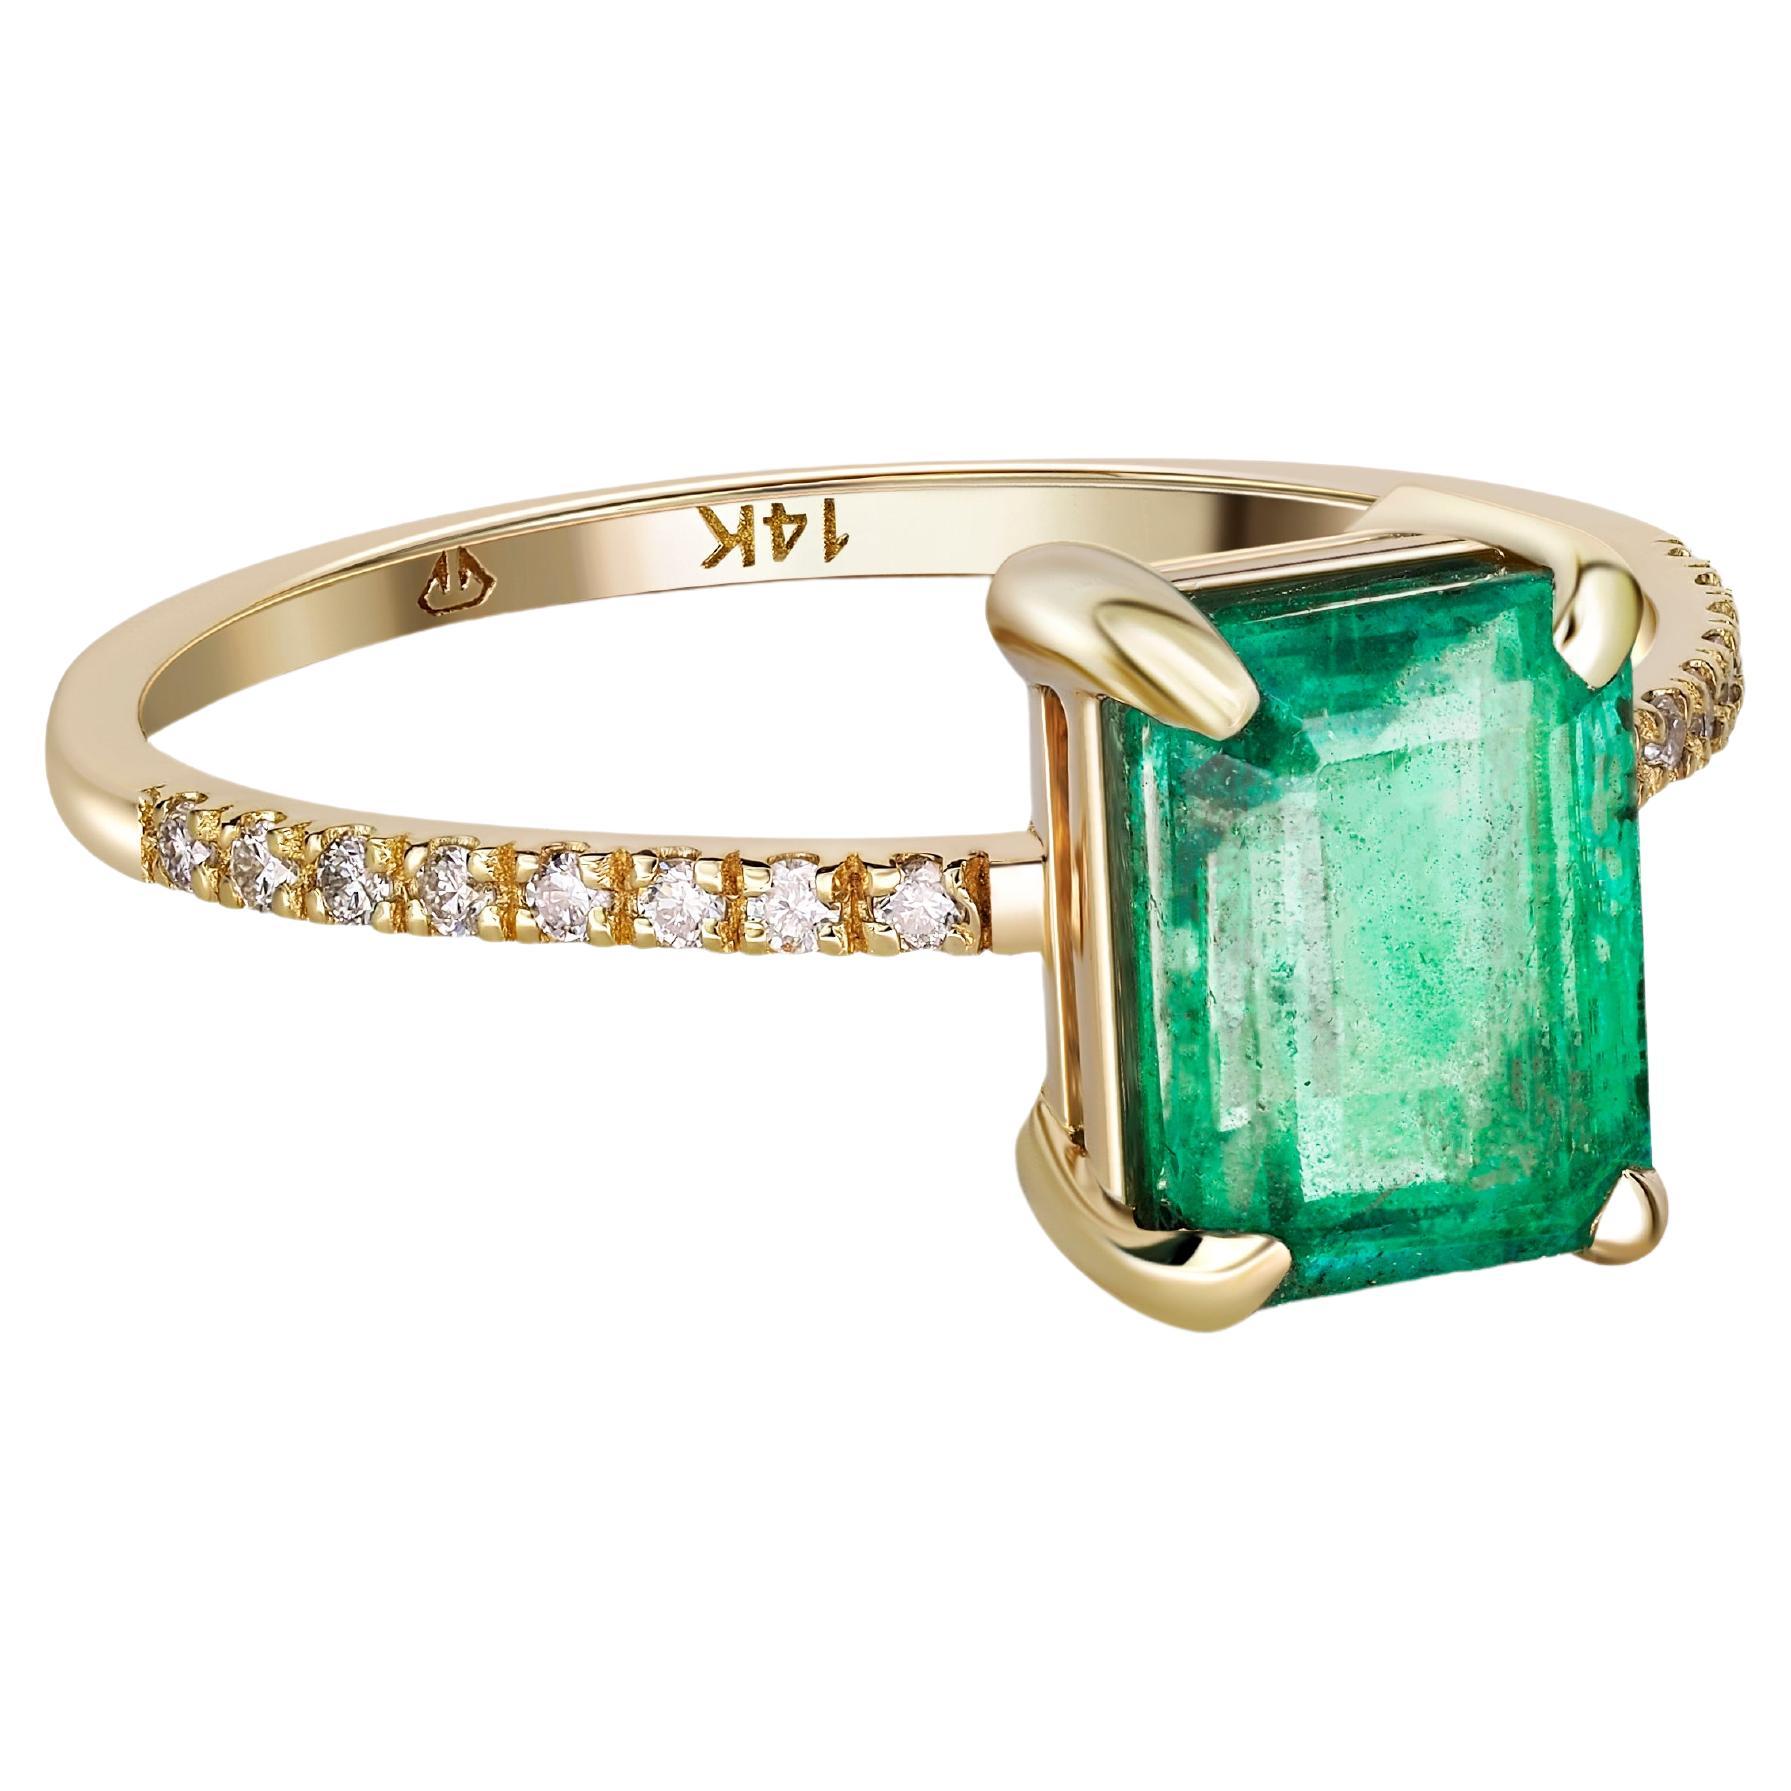 Emerald ring in 14 k gold. 